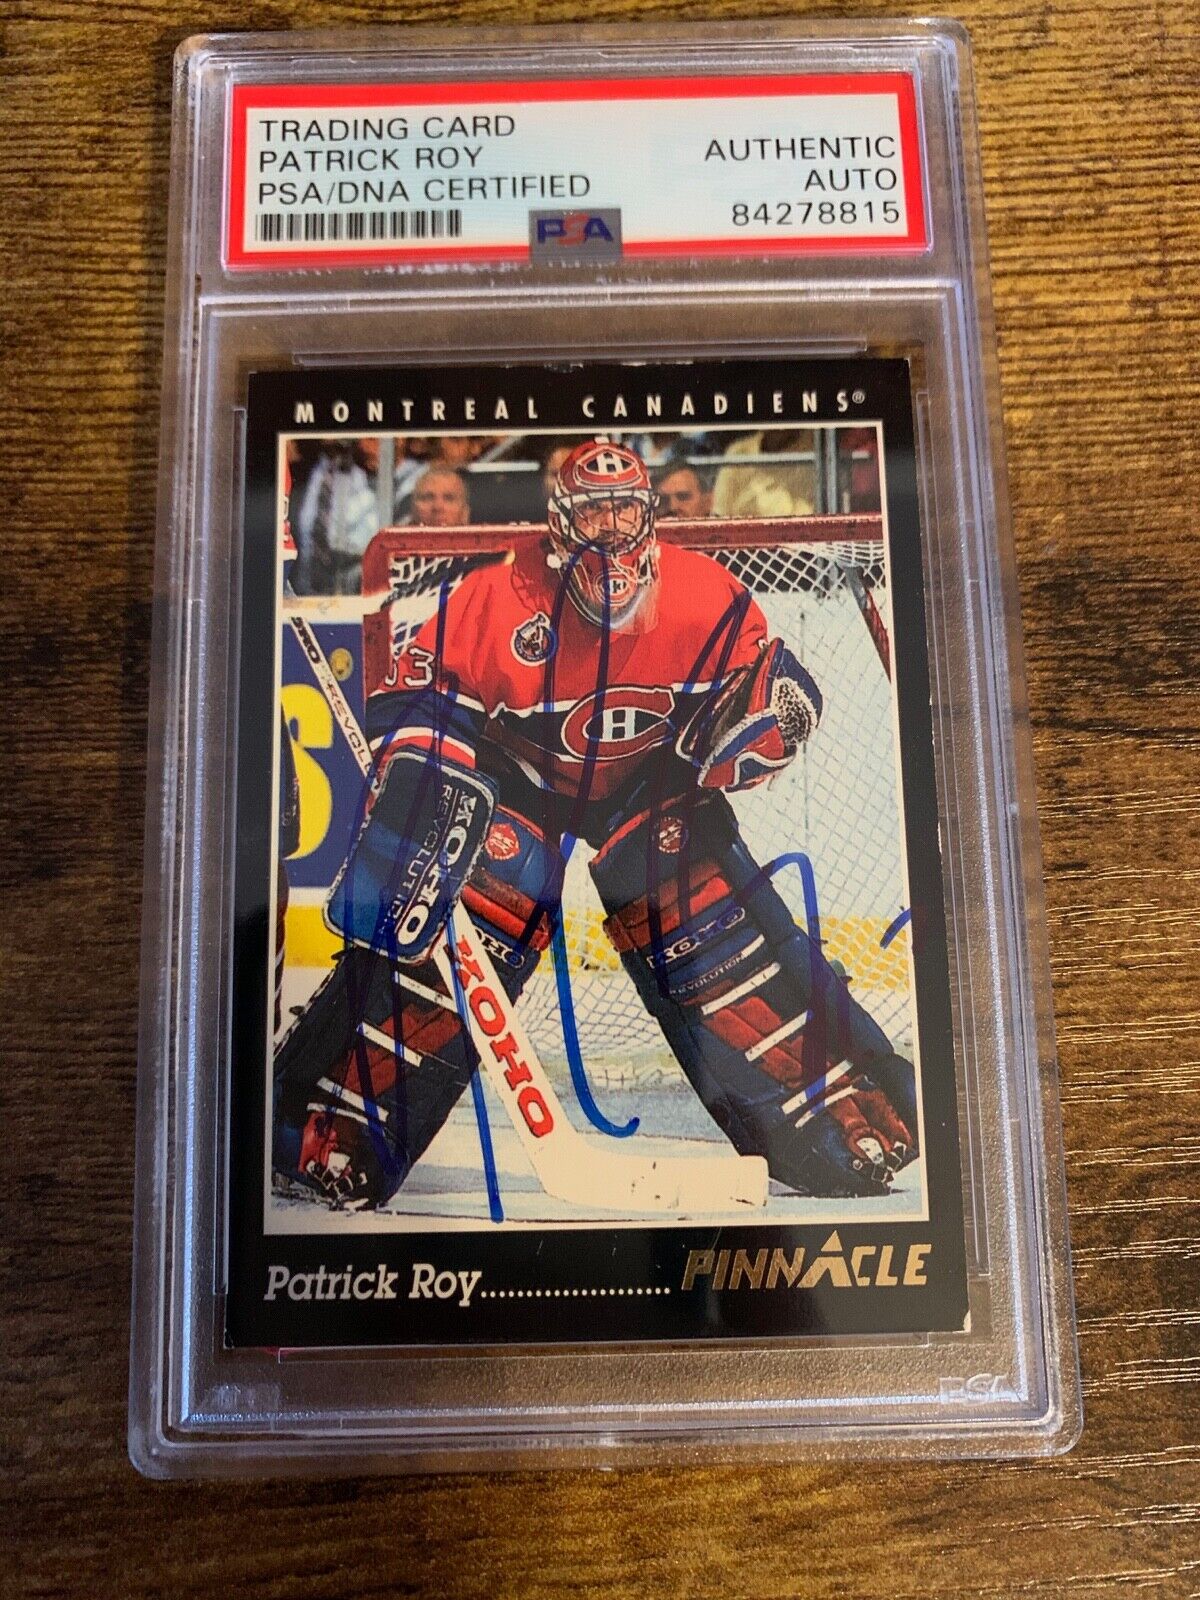 Patrick Roy Autographed Signed 1993/94 Pinnacle NHL Card PSA Certified Slabbed